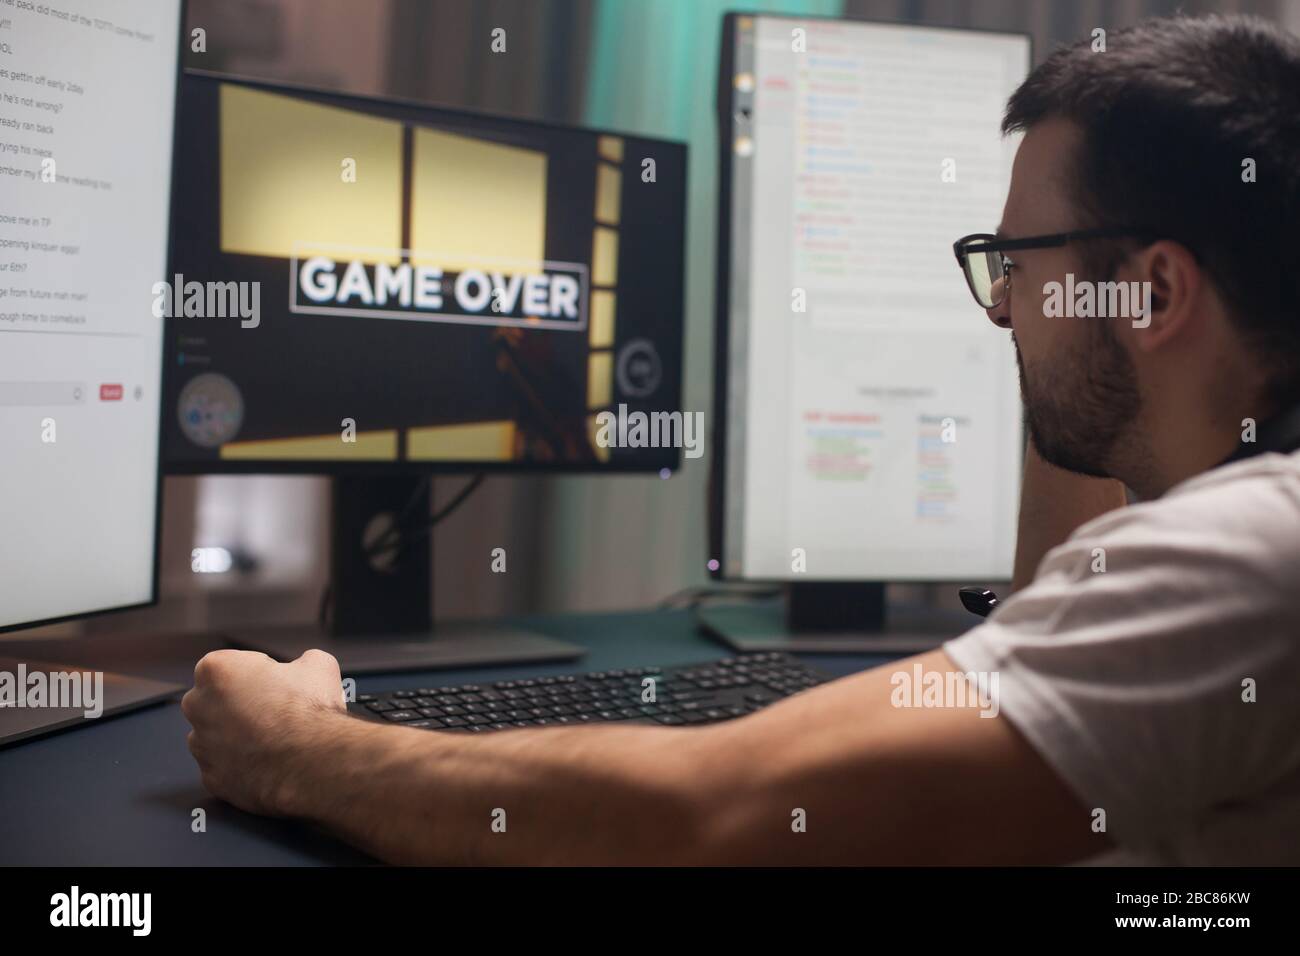 Young man keeping his fist tight after losing at online shooter games. Game over for gamer. Stock Photo